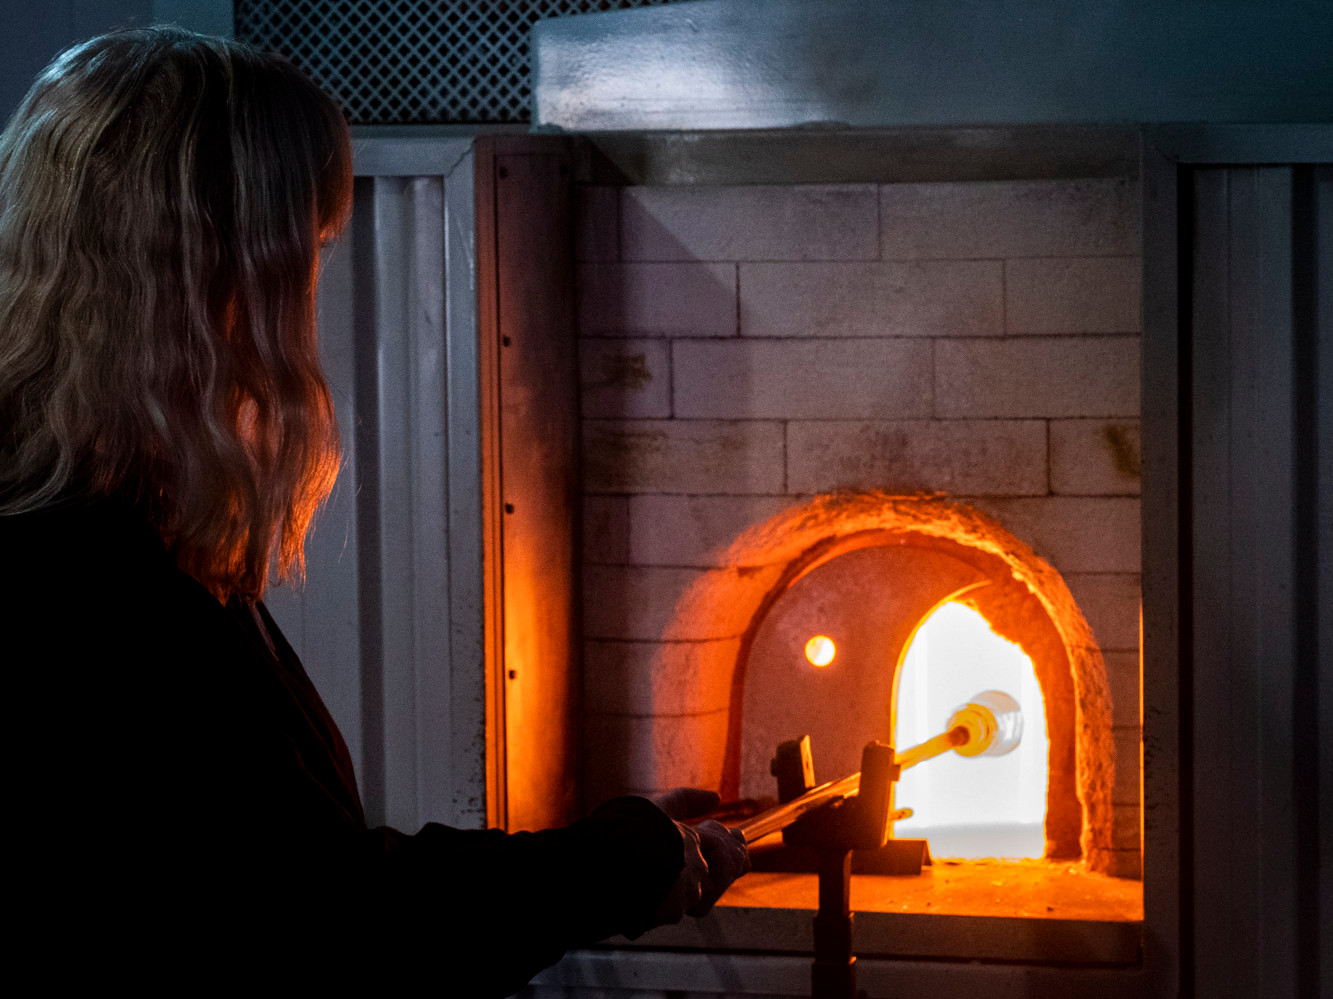 A colour photo of a long haired person who warms a stick with glass at the end in a glowing hot oven.